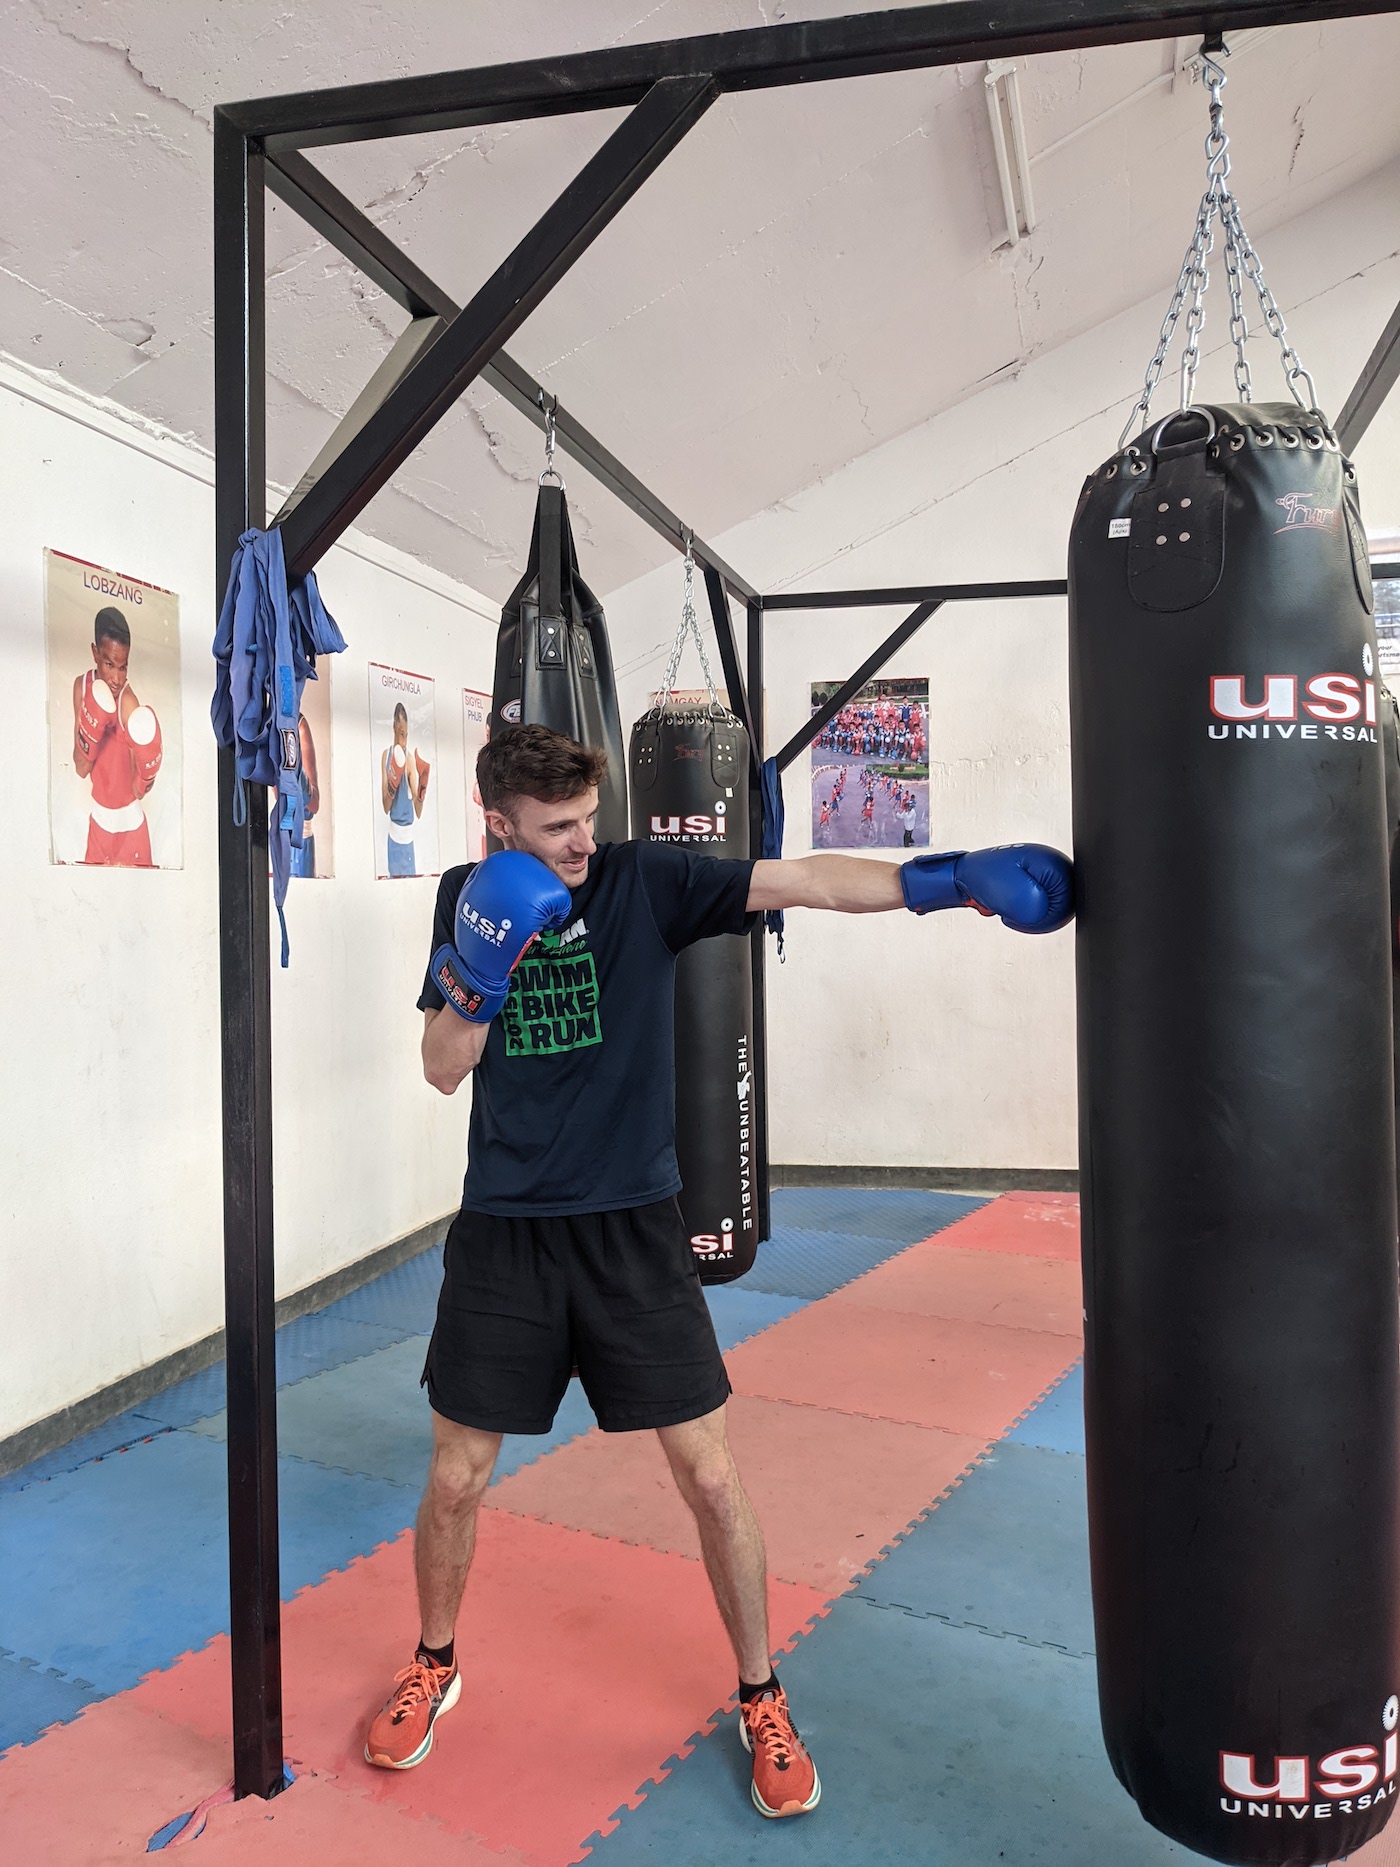 Cross-training in the national boxing gym three times per week.